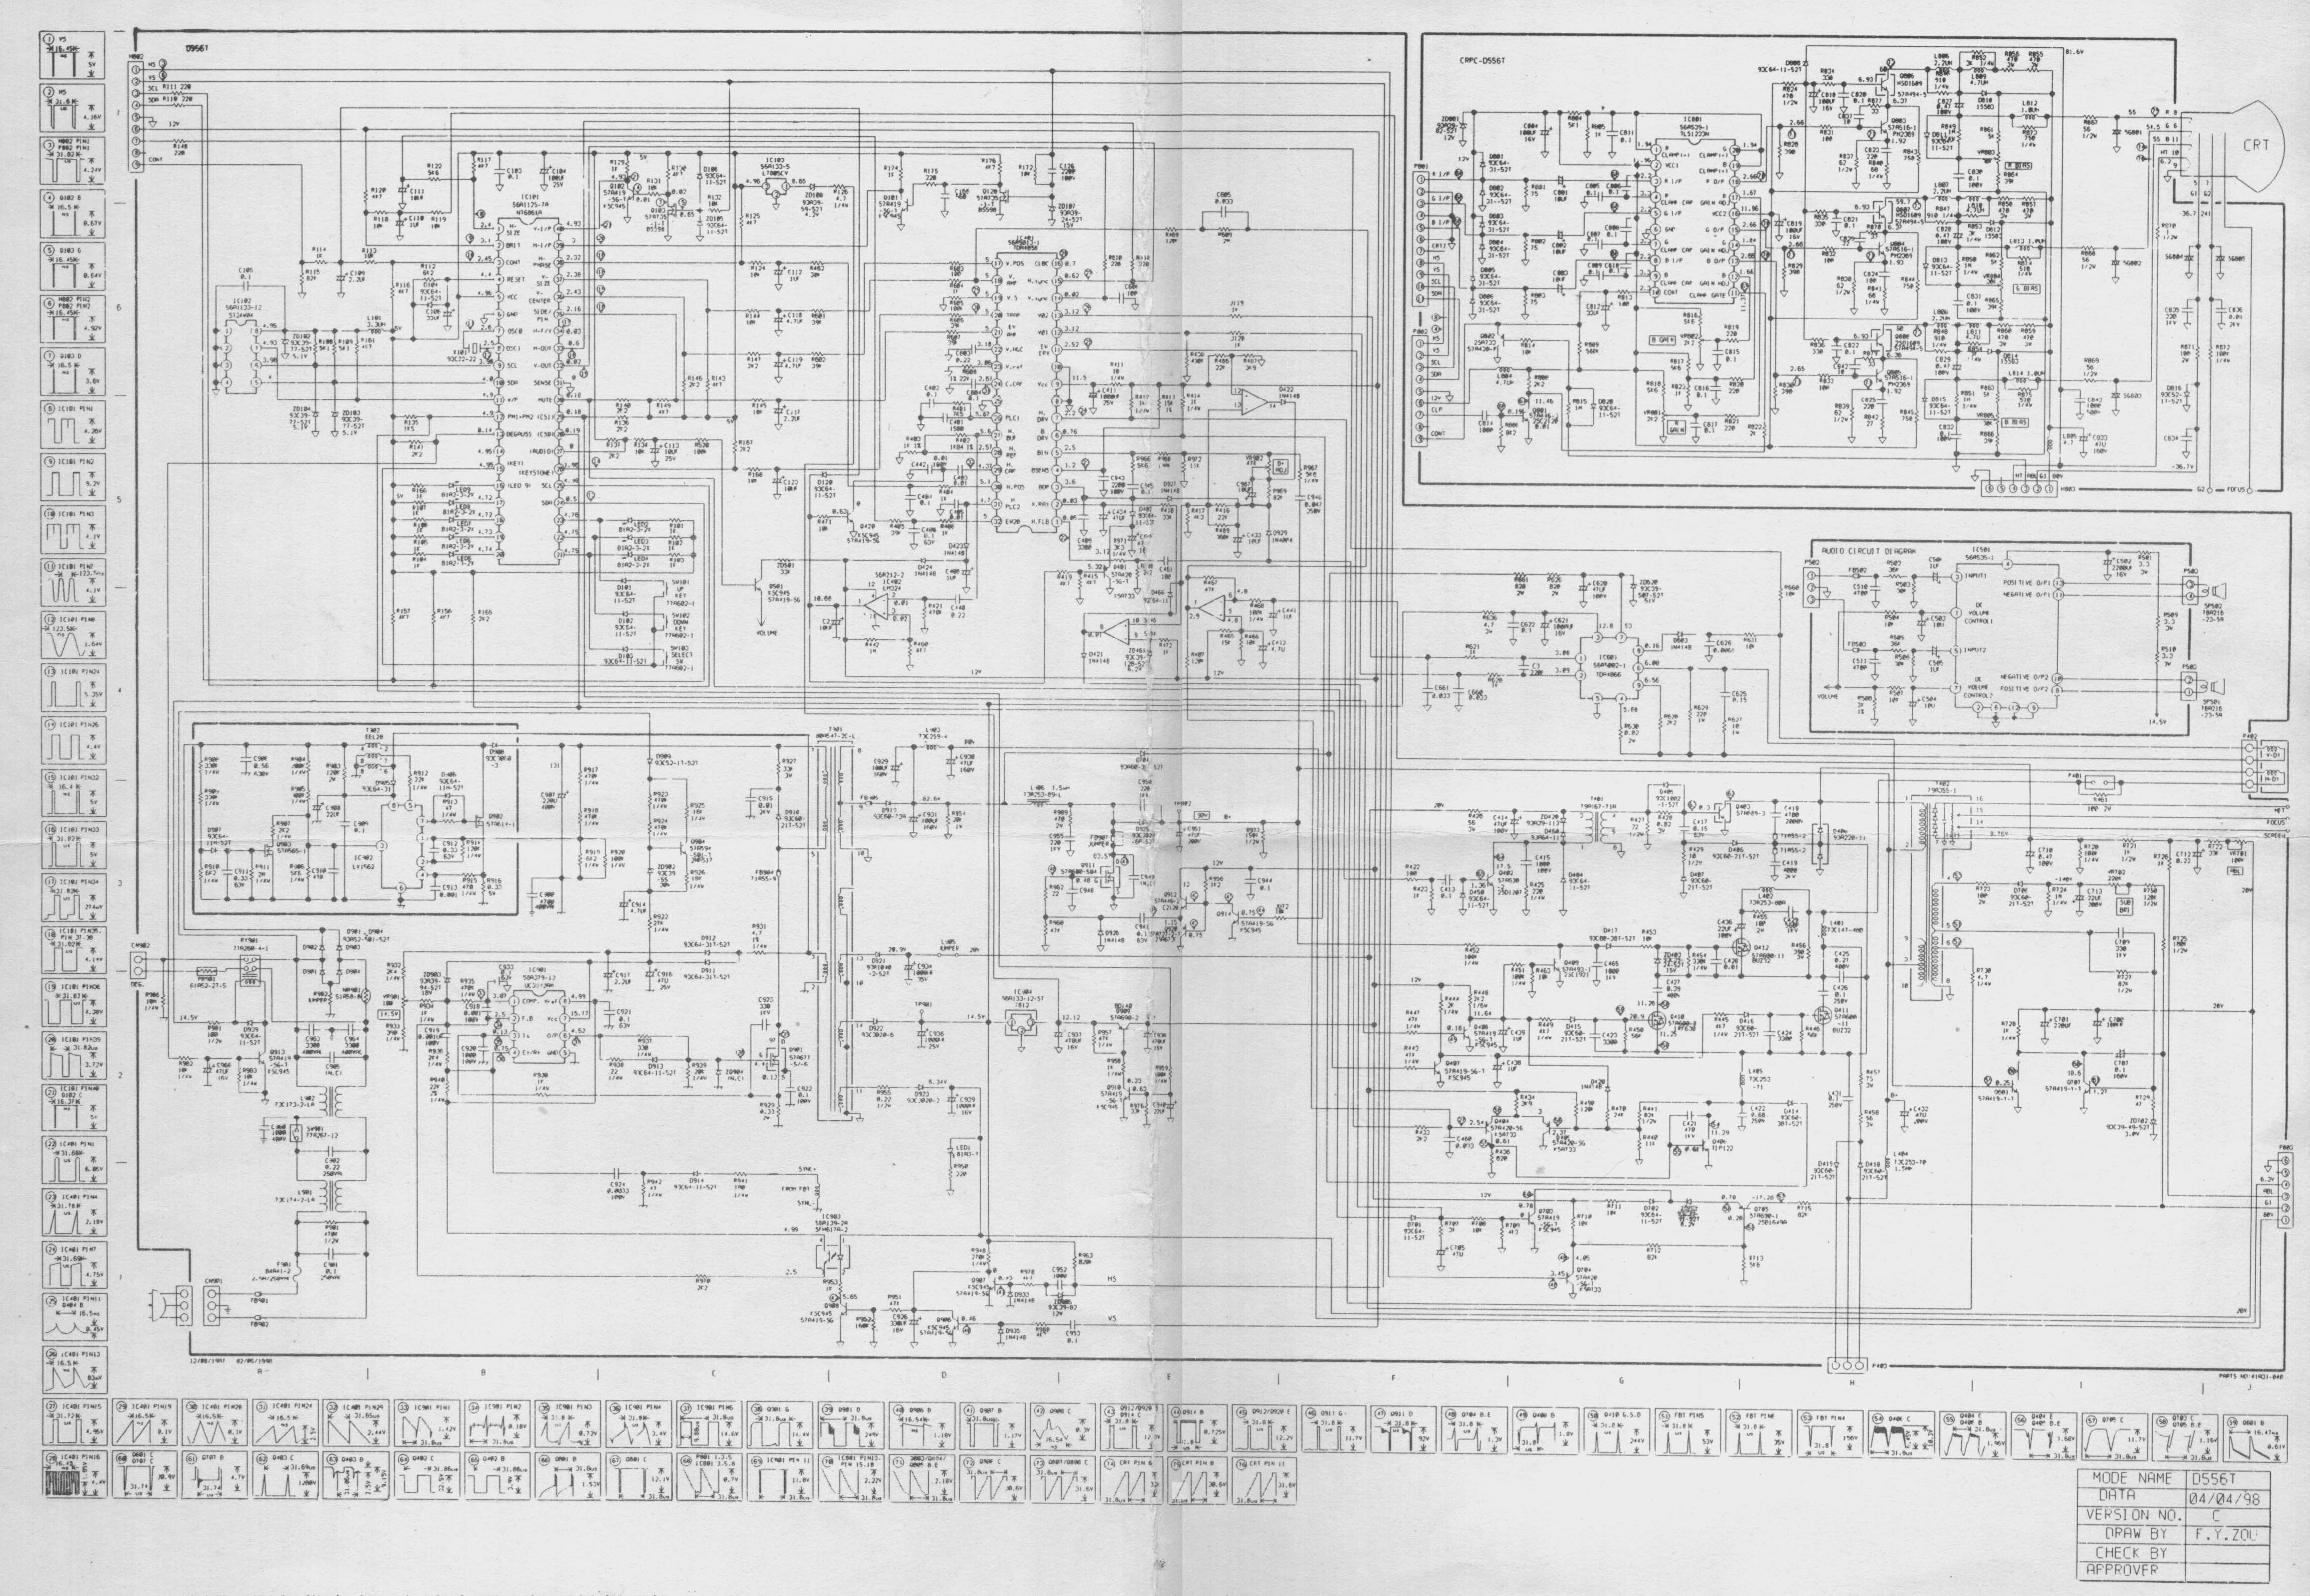 AOC 4Vn Schematic Diagram/ Diagrama Eléctrico. This one can be seen clearly; not distorted. Este sí se ve bien.